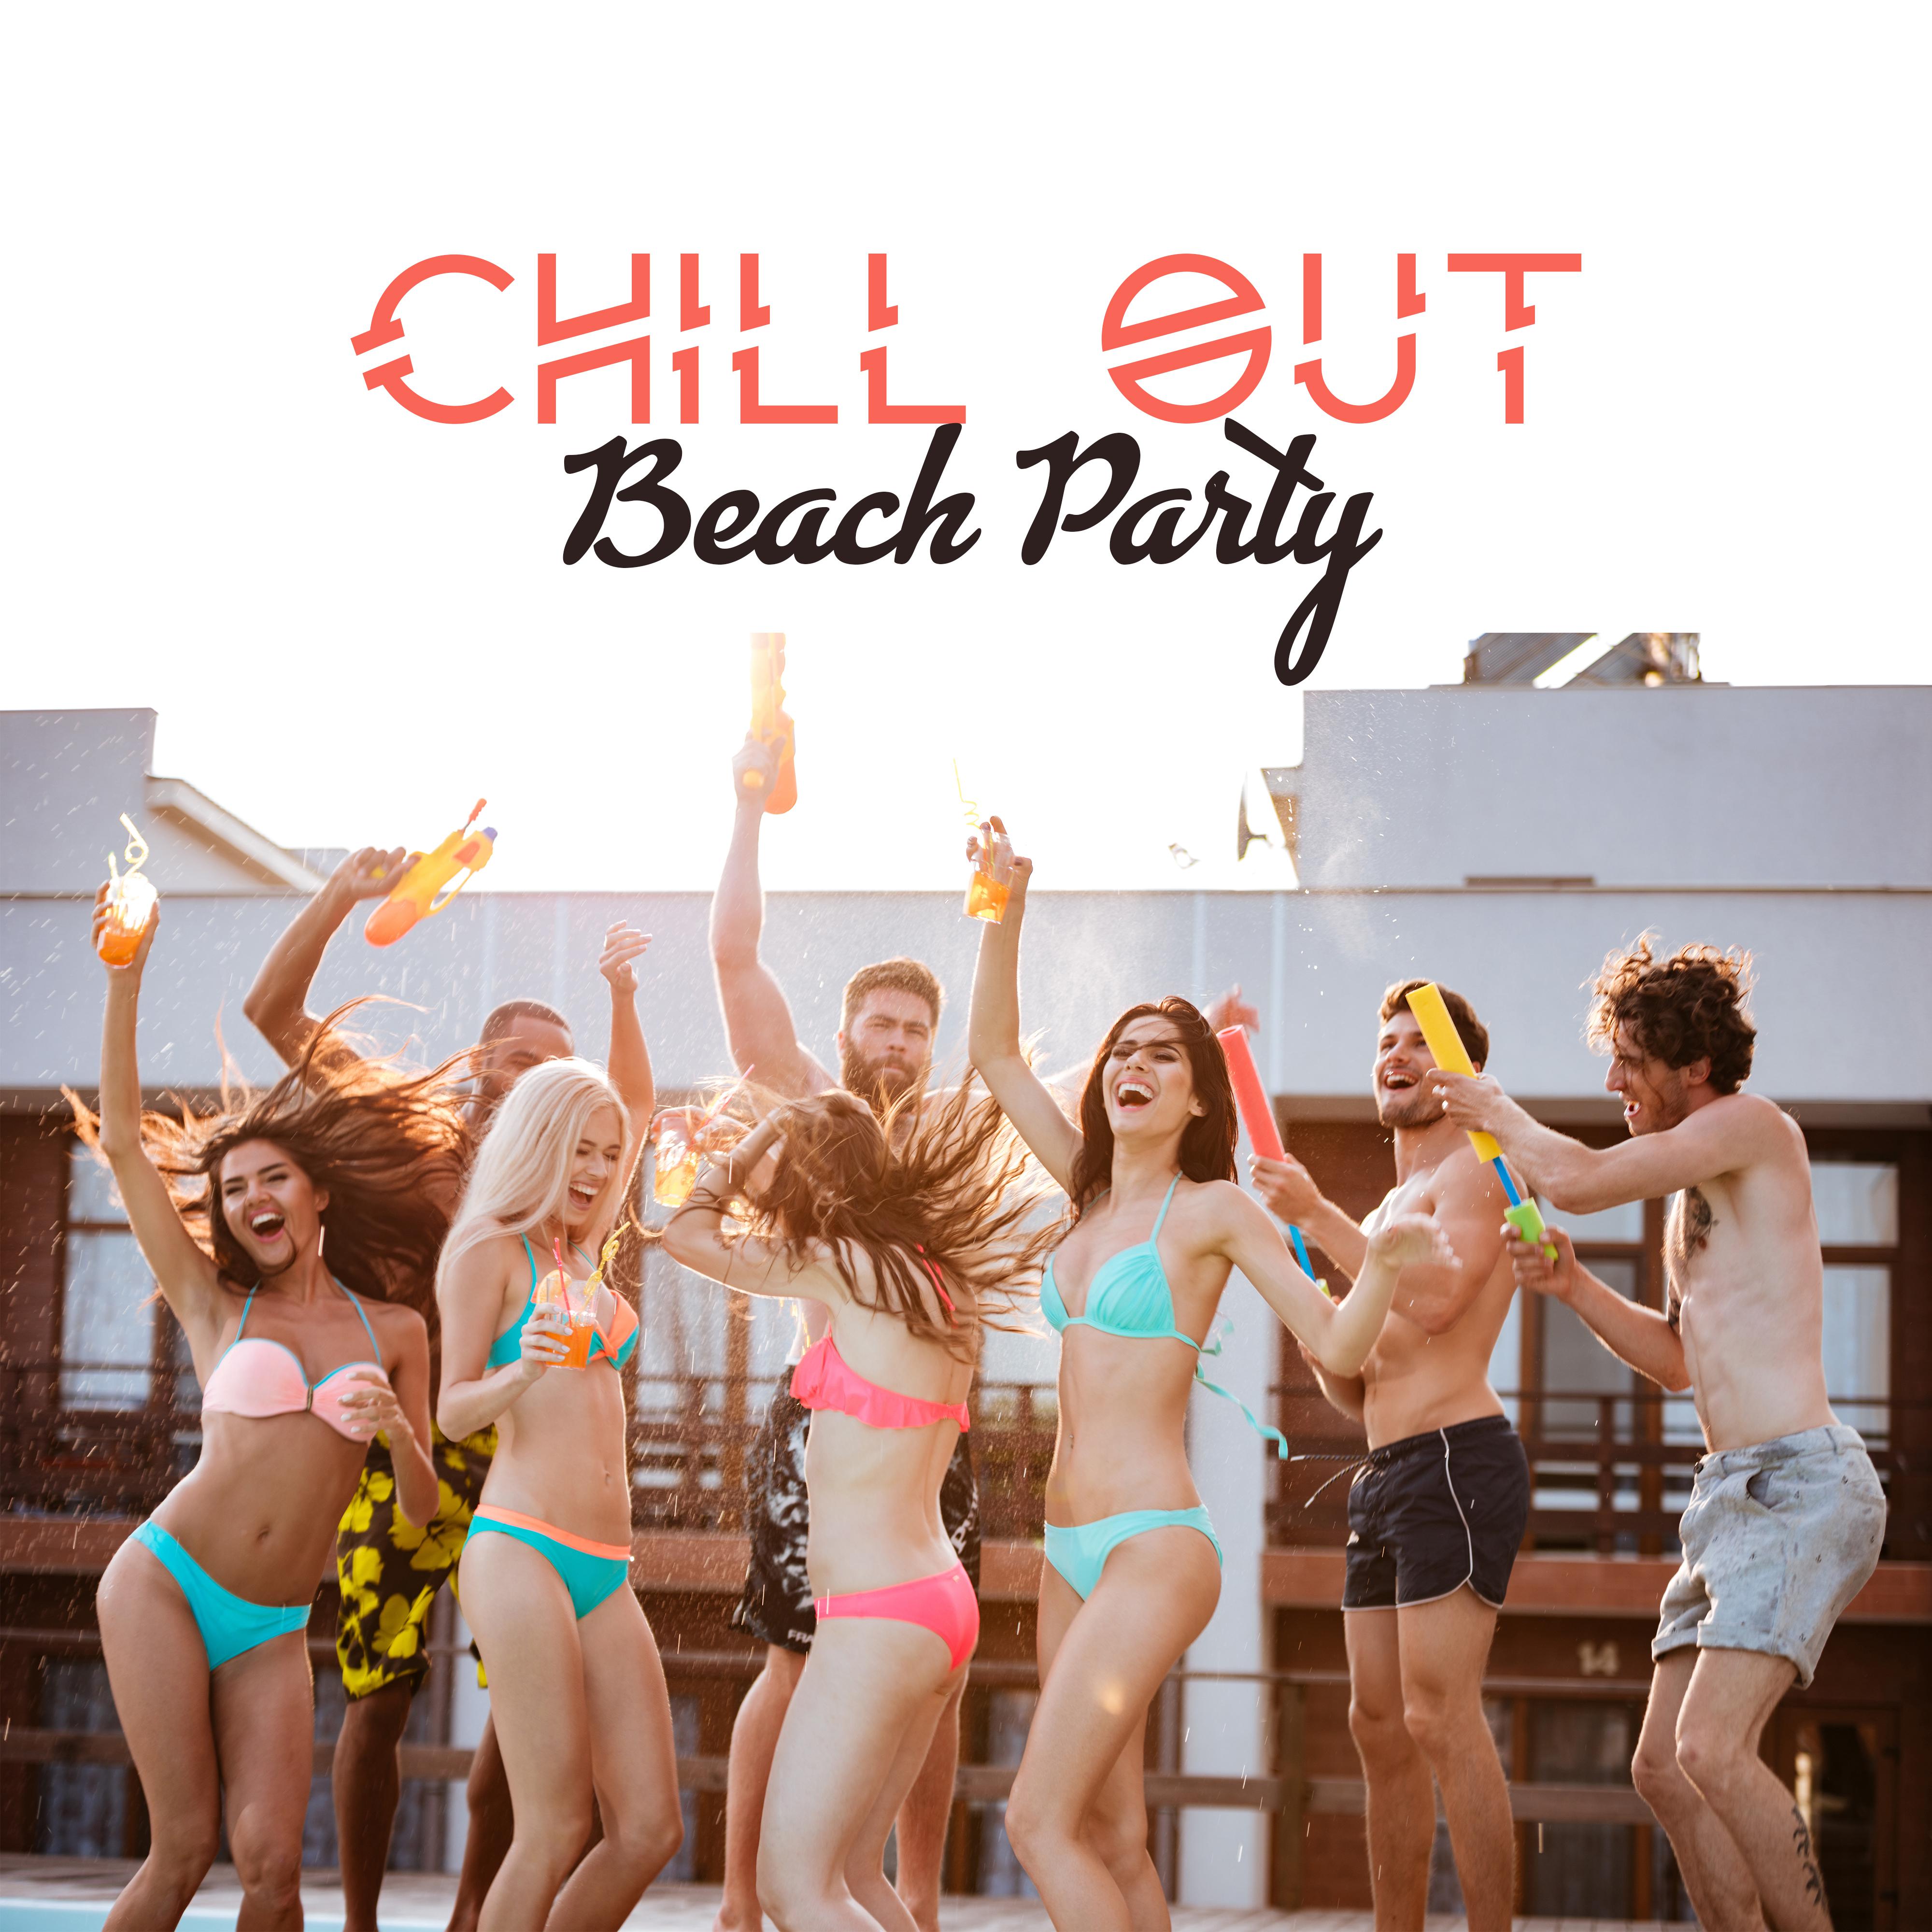 Chill Out Beach Party  Ibiza Dance Music, Electronic Chill Out, Summer Hits, Cocktail Bar